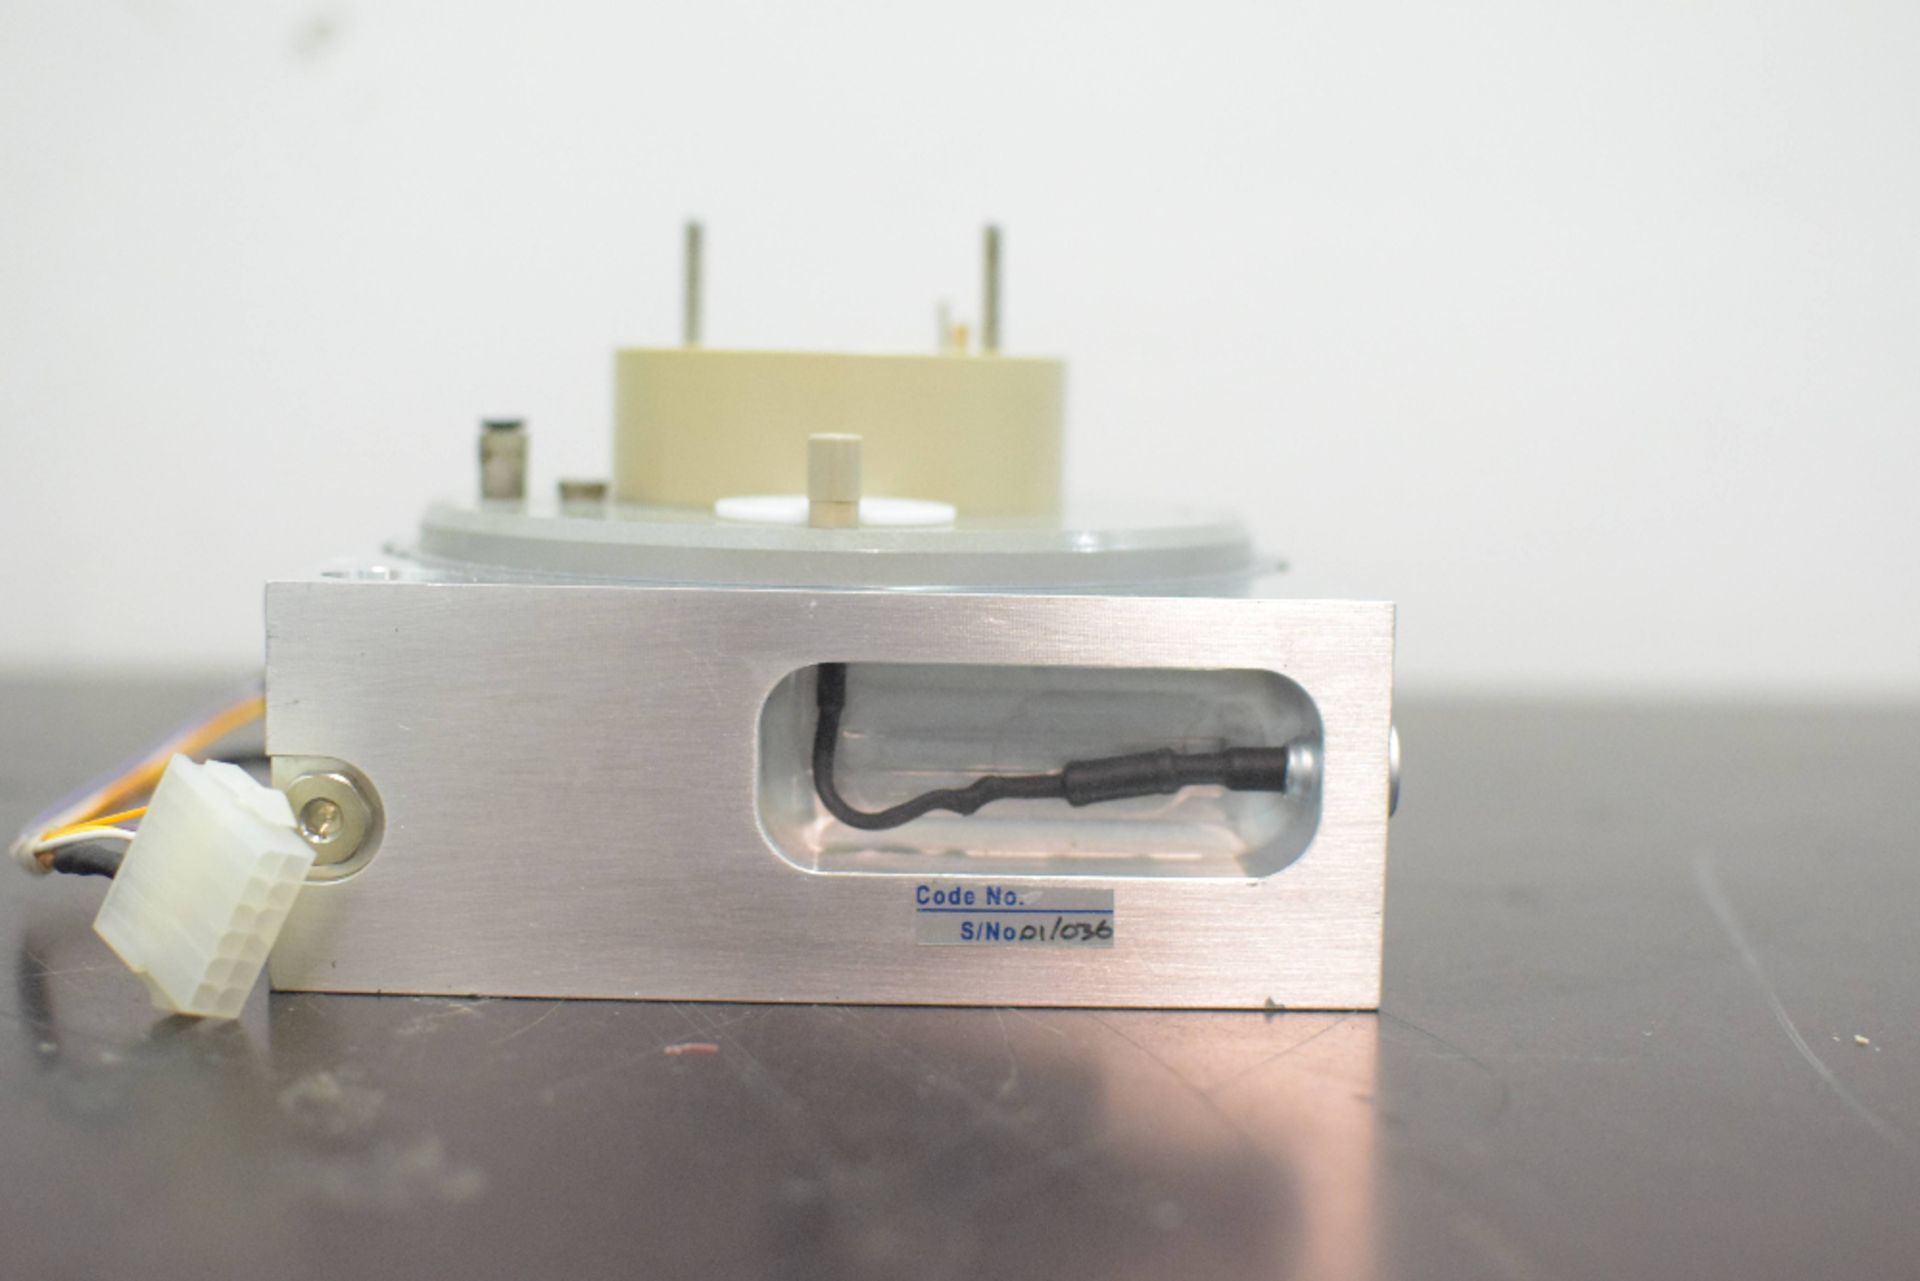 Waters Micromass ZQ 2000 Spectrometer - Image 4 of 4